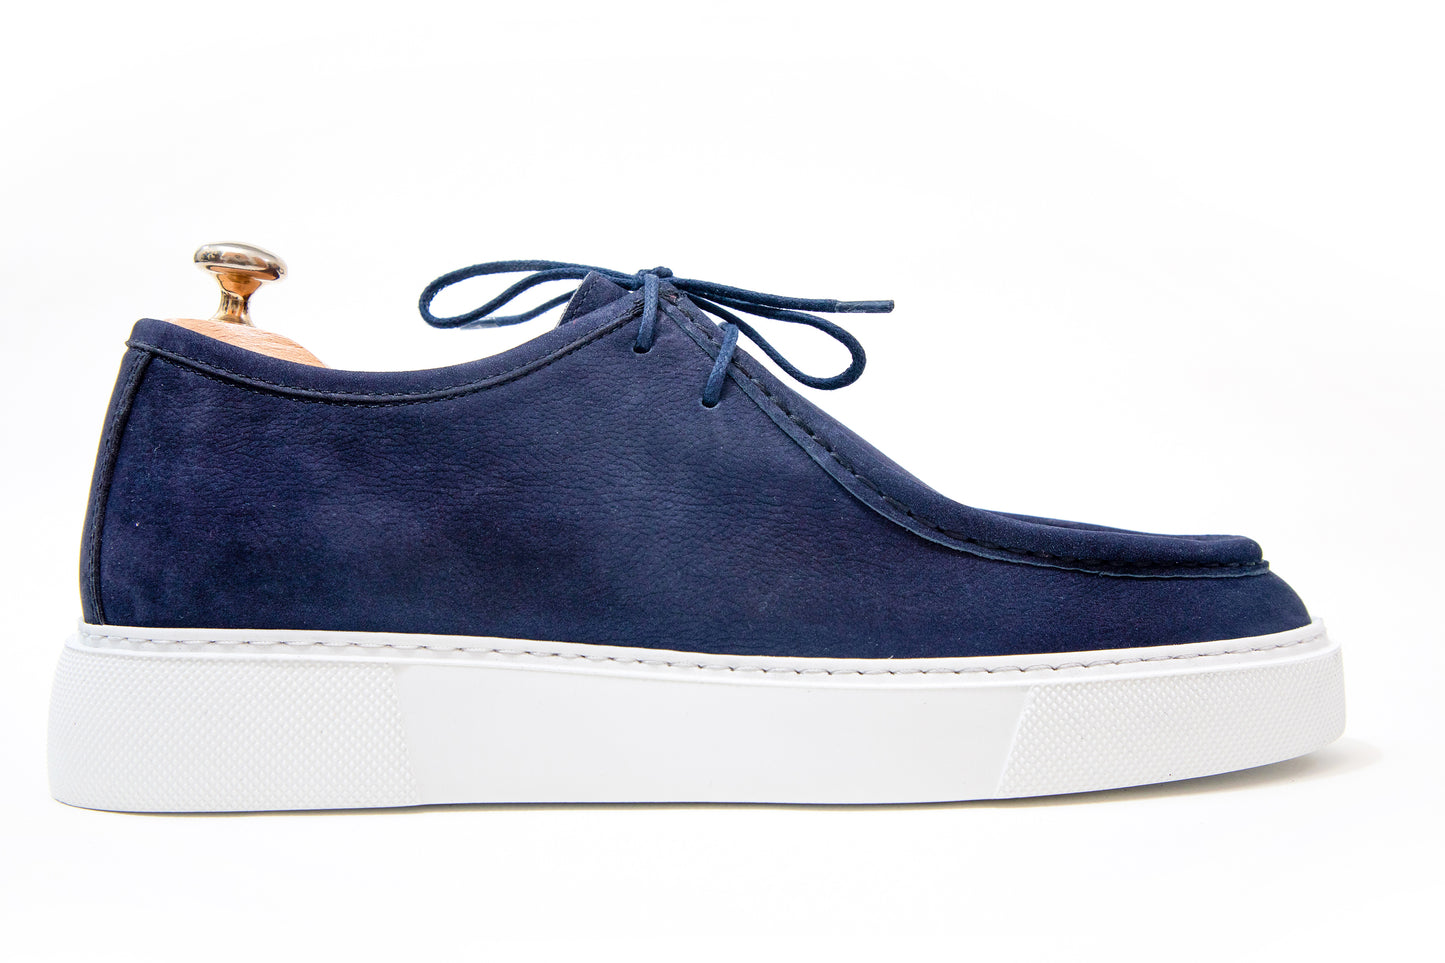 Dublin Wallabee Navy Blue with White Sole